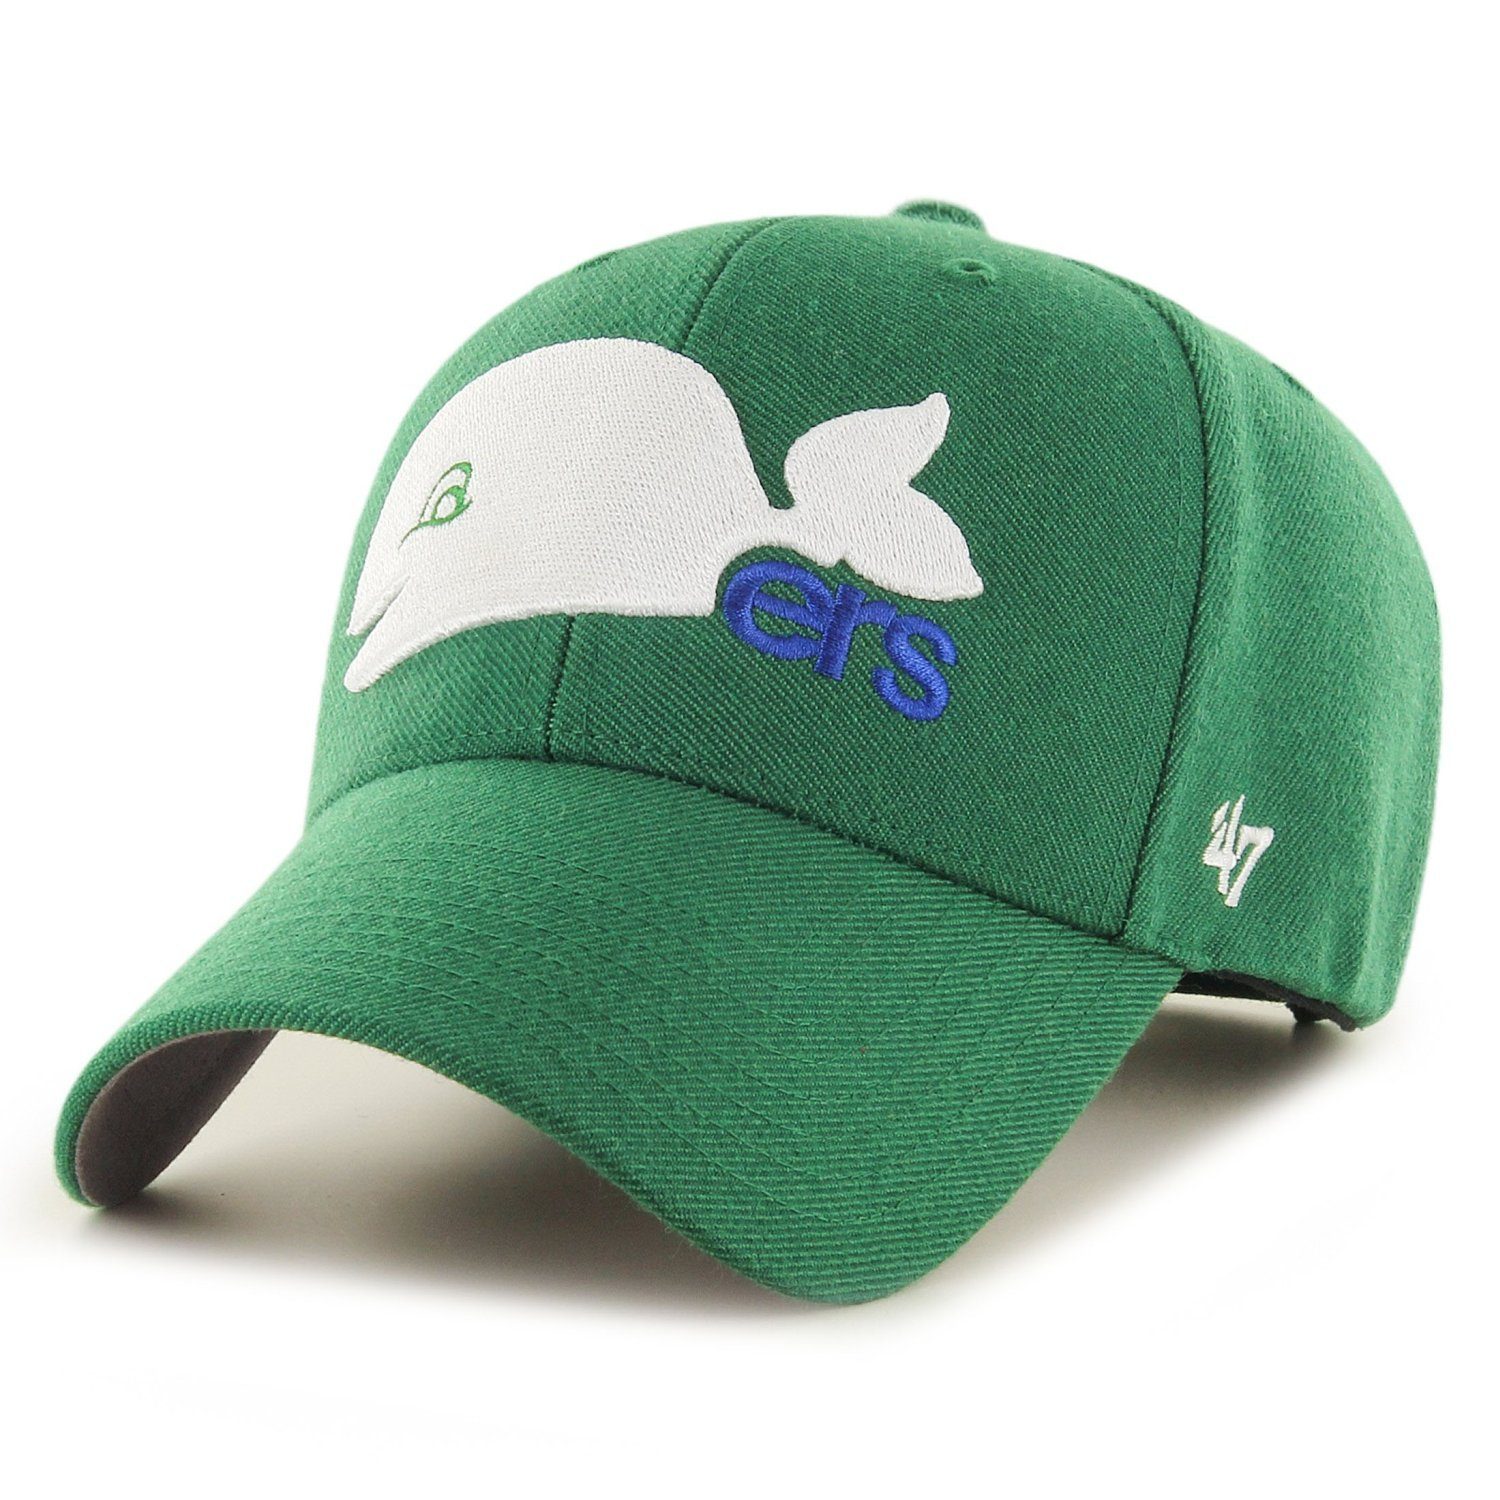 Brand Fit Relaxed Hartford NHL Trucker Whalers Cap '47